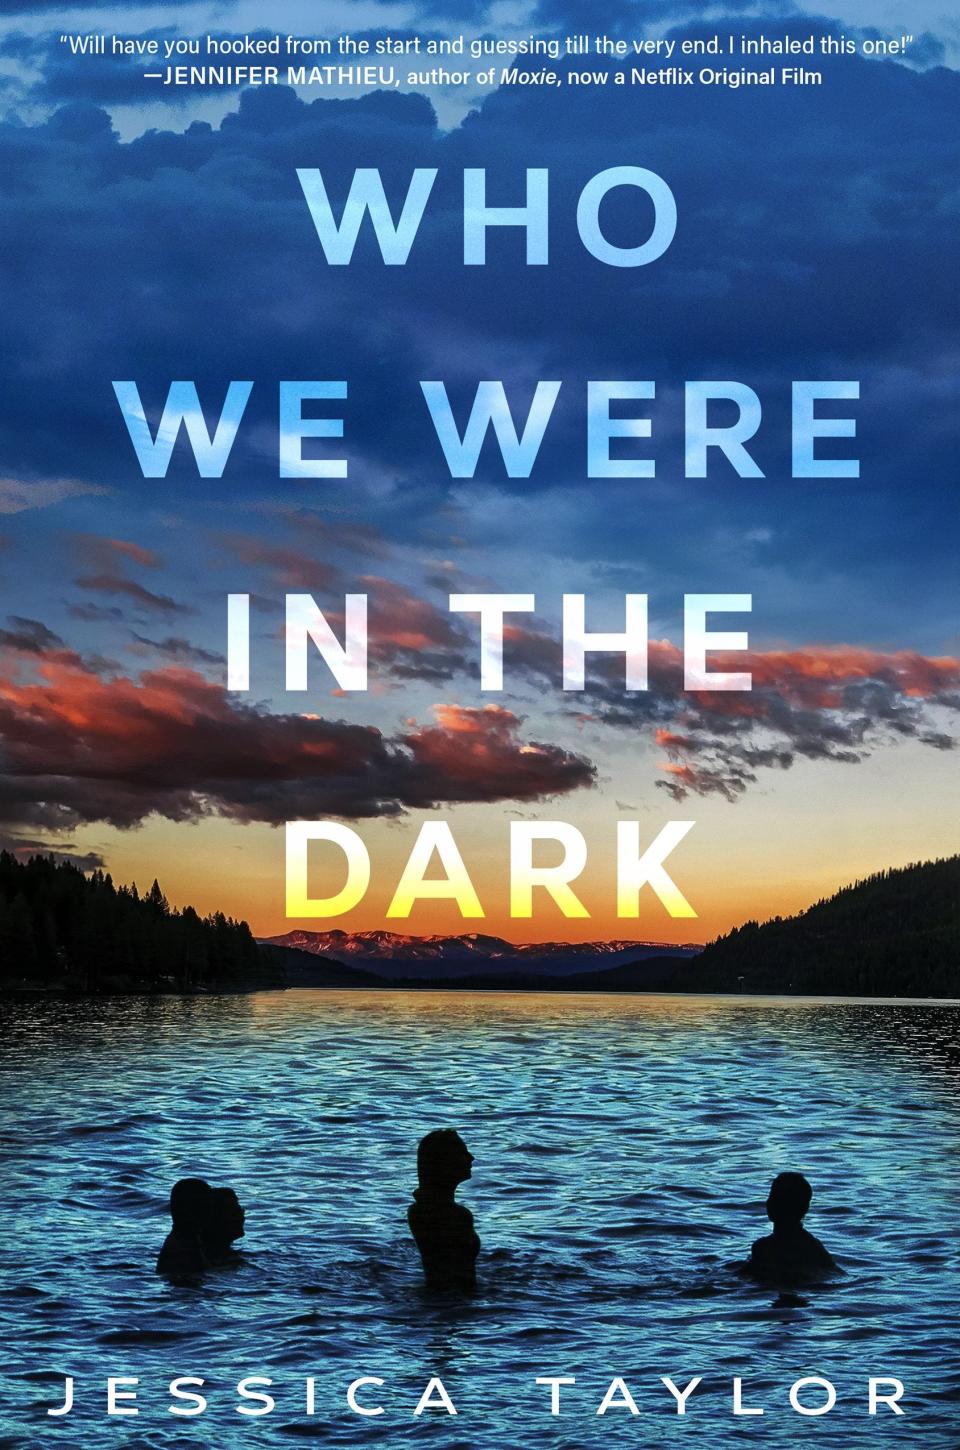 "Who We Were in the Dark," by Jessica Taylor.